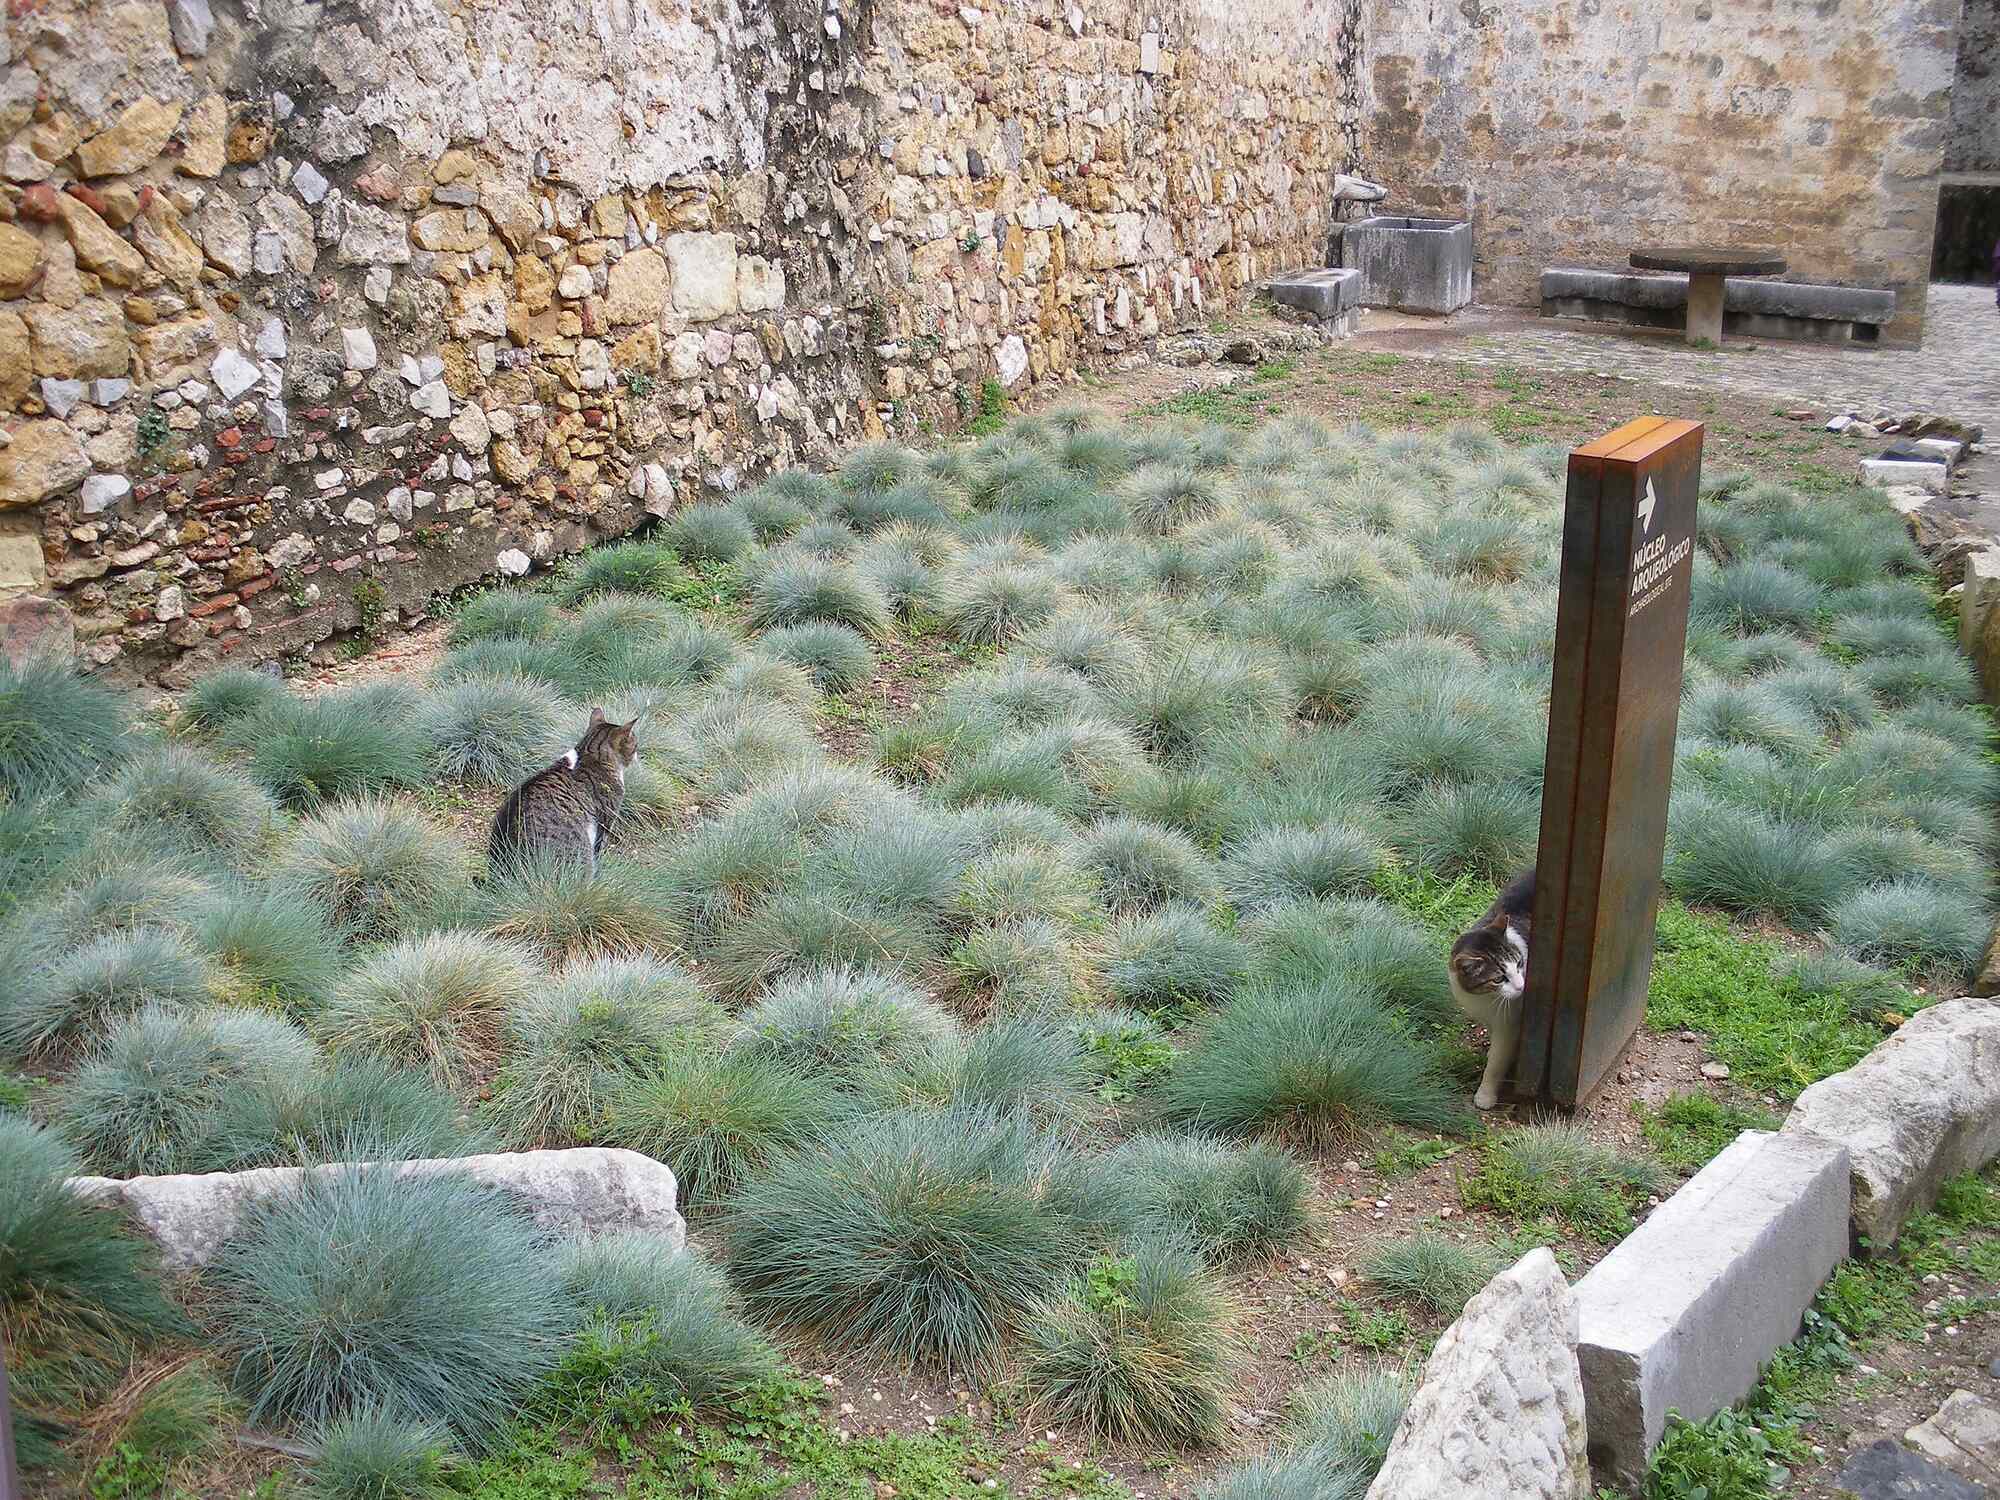 Photograph of tufts of blue fescue growing next to a stone wall. The image shows a cat sitting in it. Blue fescue is a flowering plant and looks like several fluffy balls on the floor.